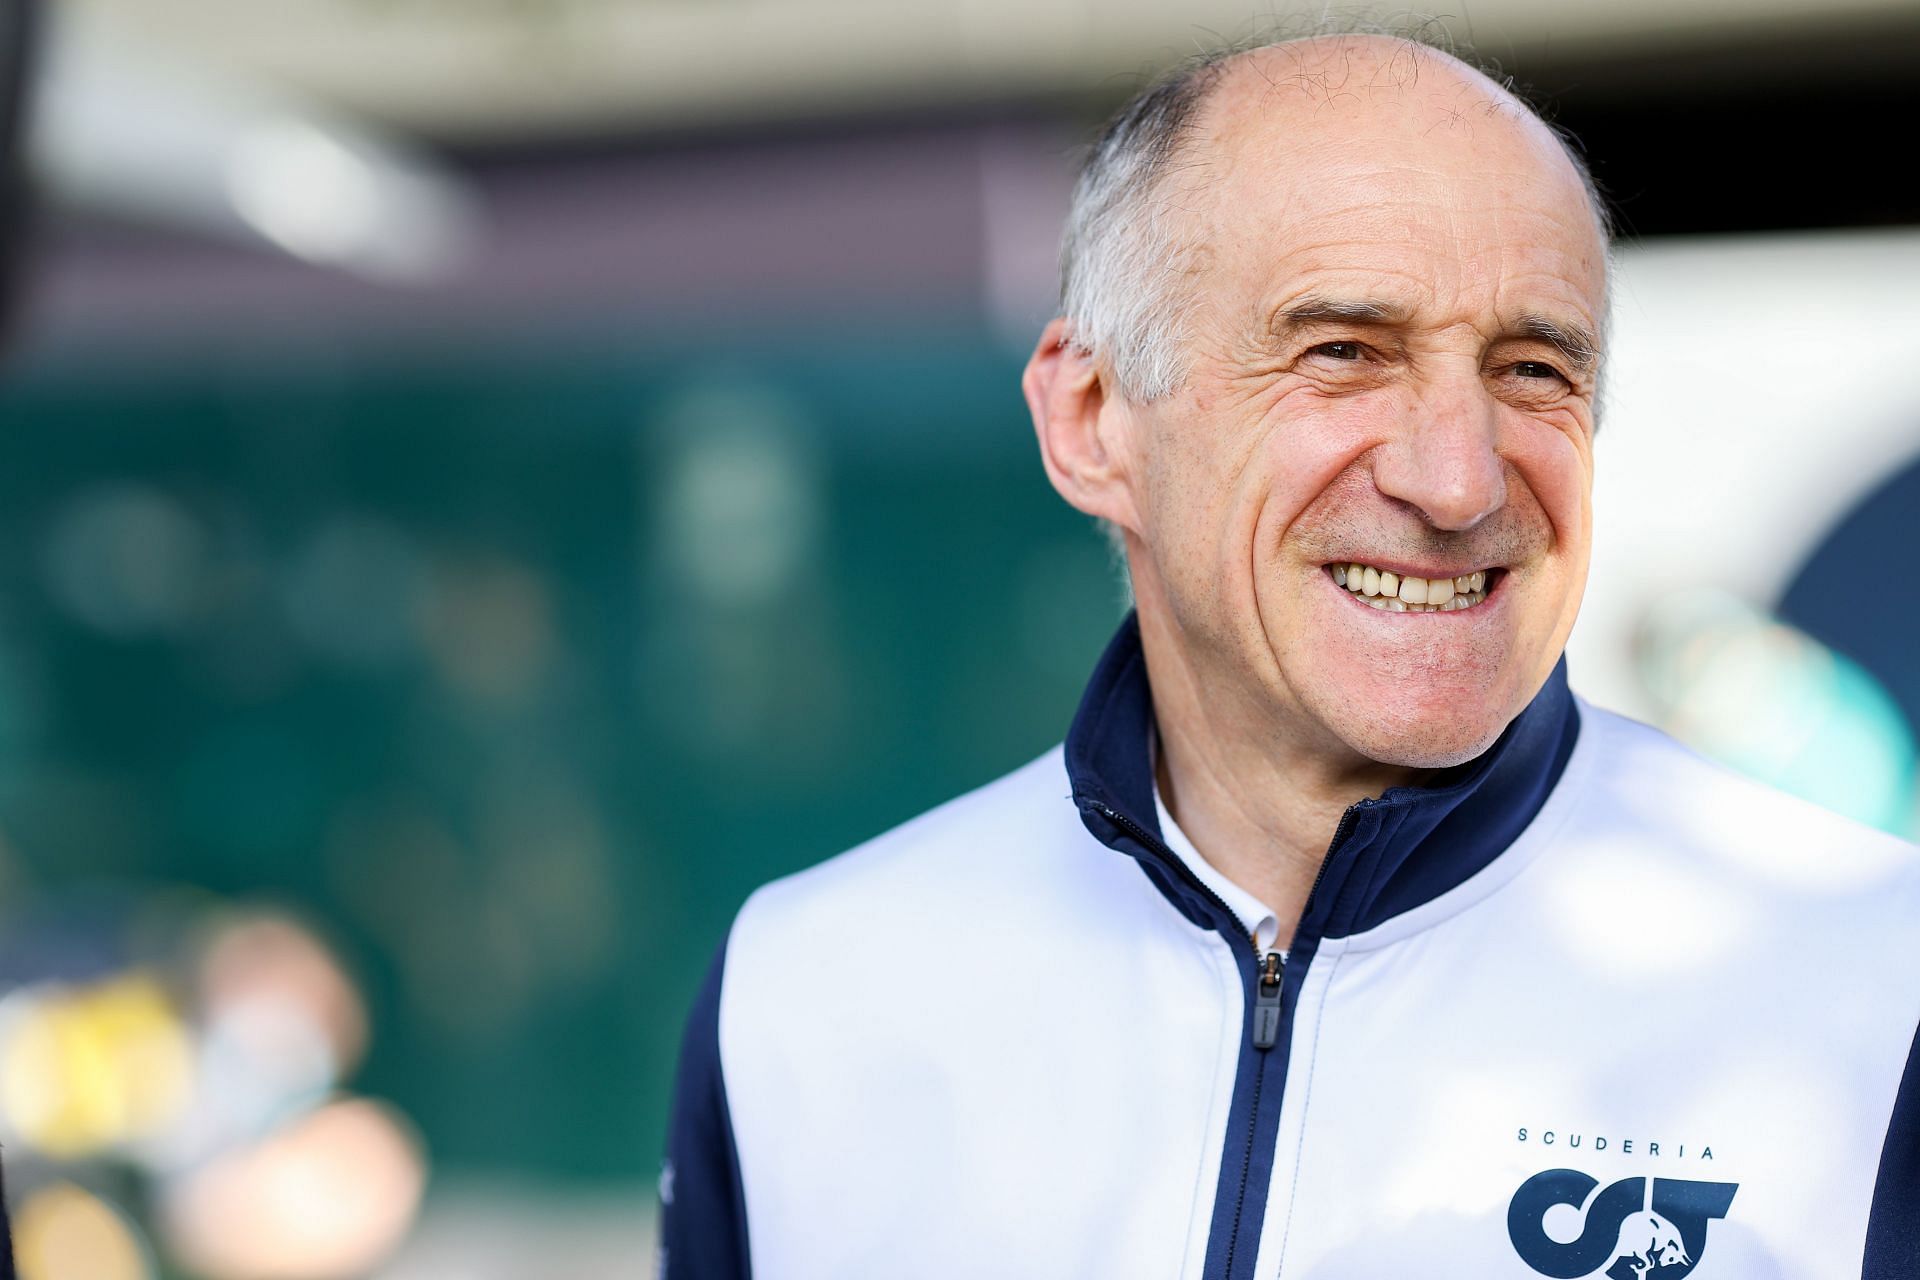 Franz Tost during practice ahead of the F1 Grand Prix of Australia at Melbourne Grand Prix Circuit on in Melbourne, Australia. (Photo by Peter Fox/Getty Images)